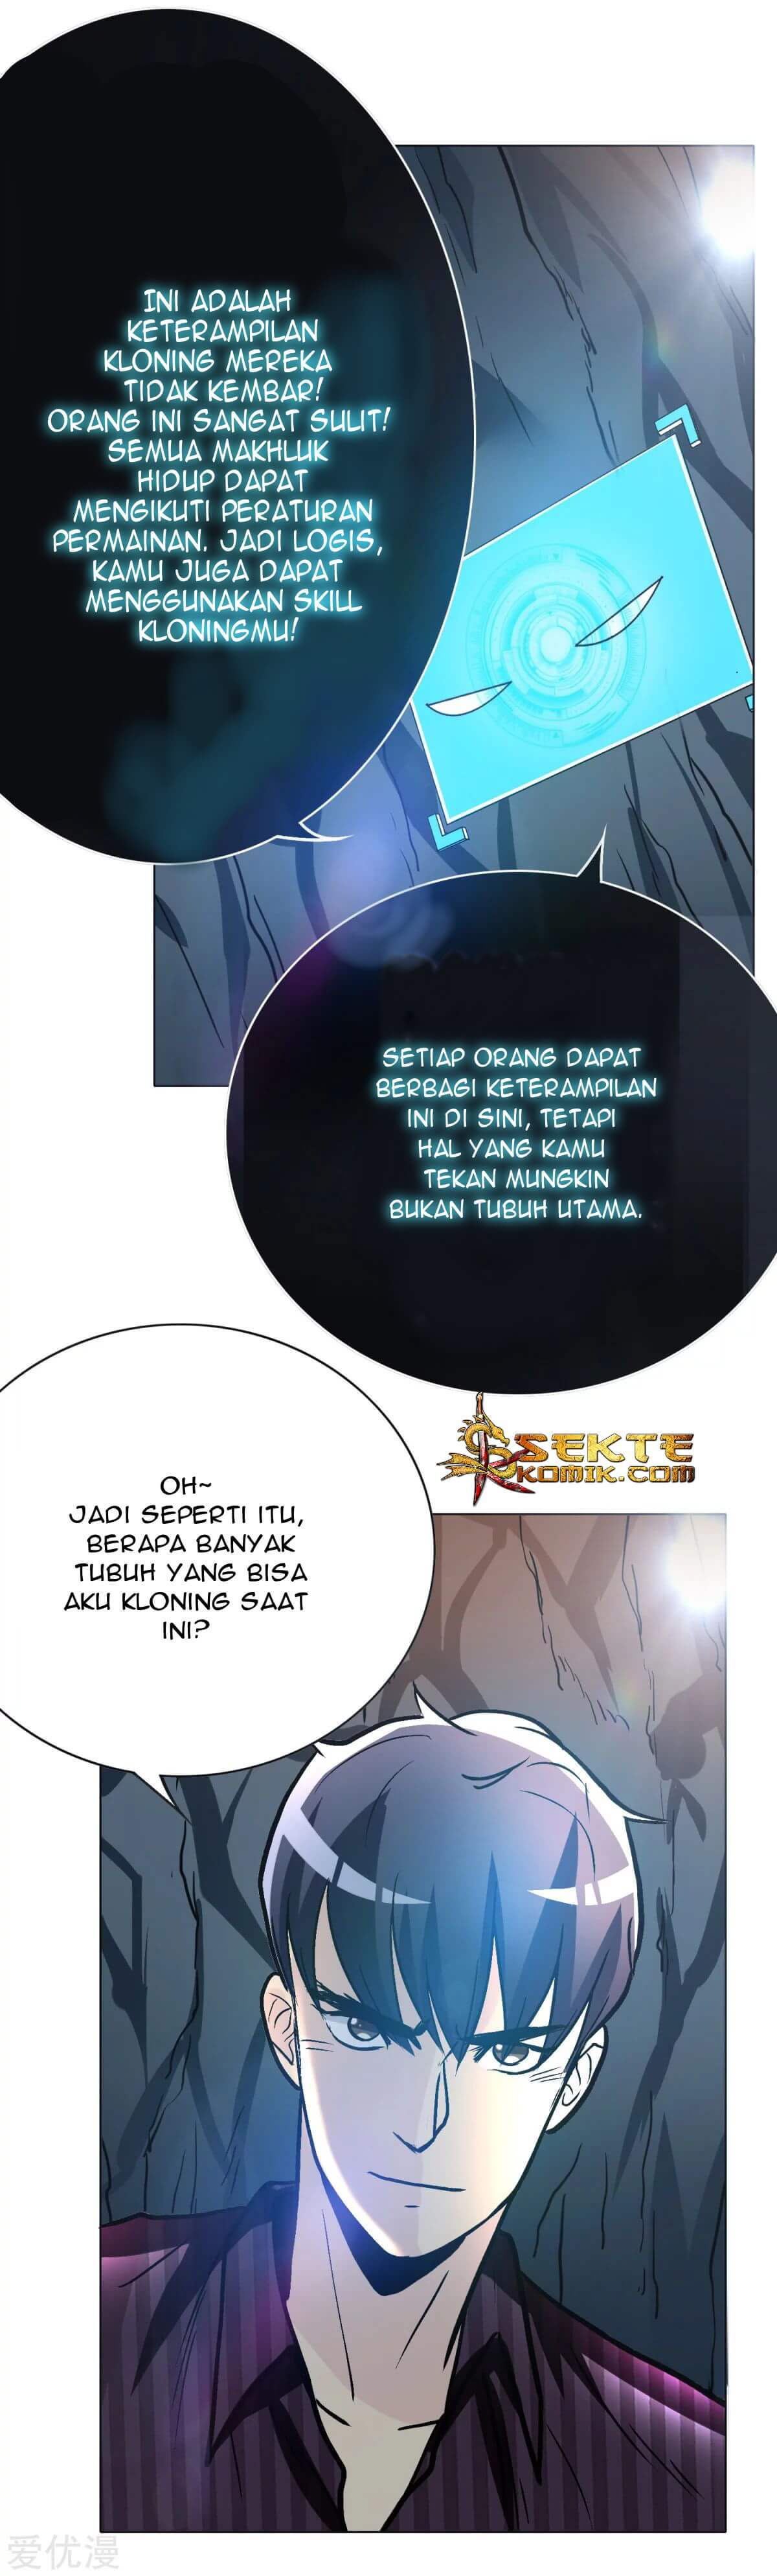 Xianzun System in the City Chapter 45